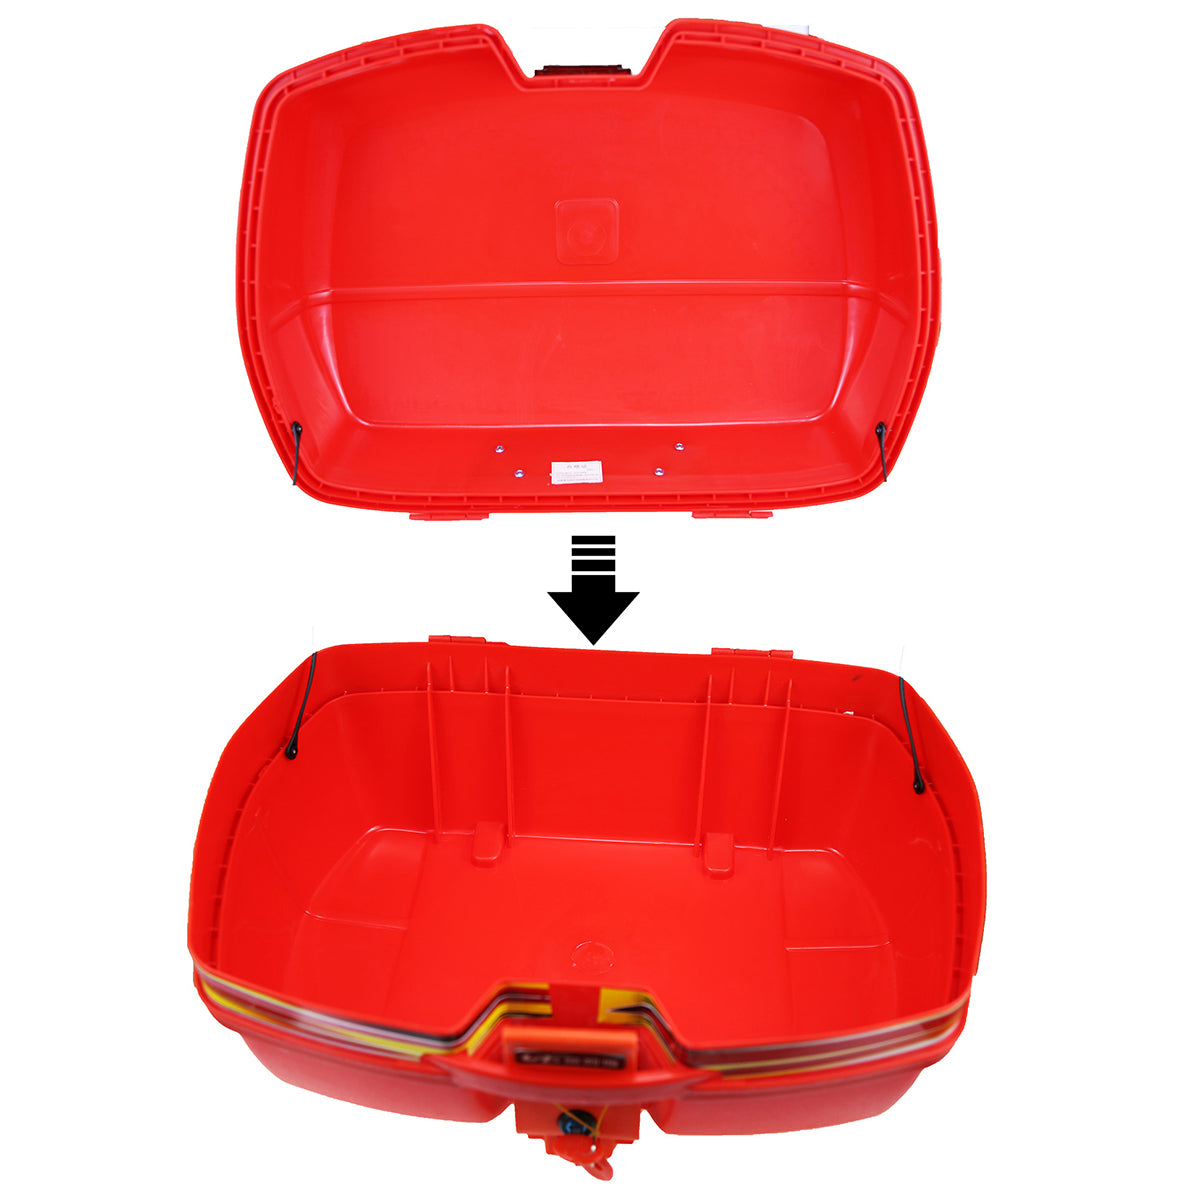 Orange Red Motorcycle Tour Tail Box Scooter Trunk Luggage Top Lock Storage Carrier Case